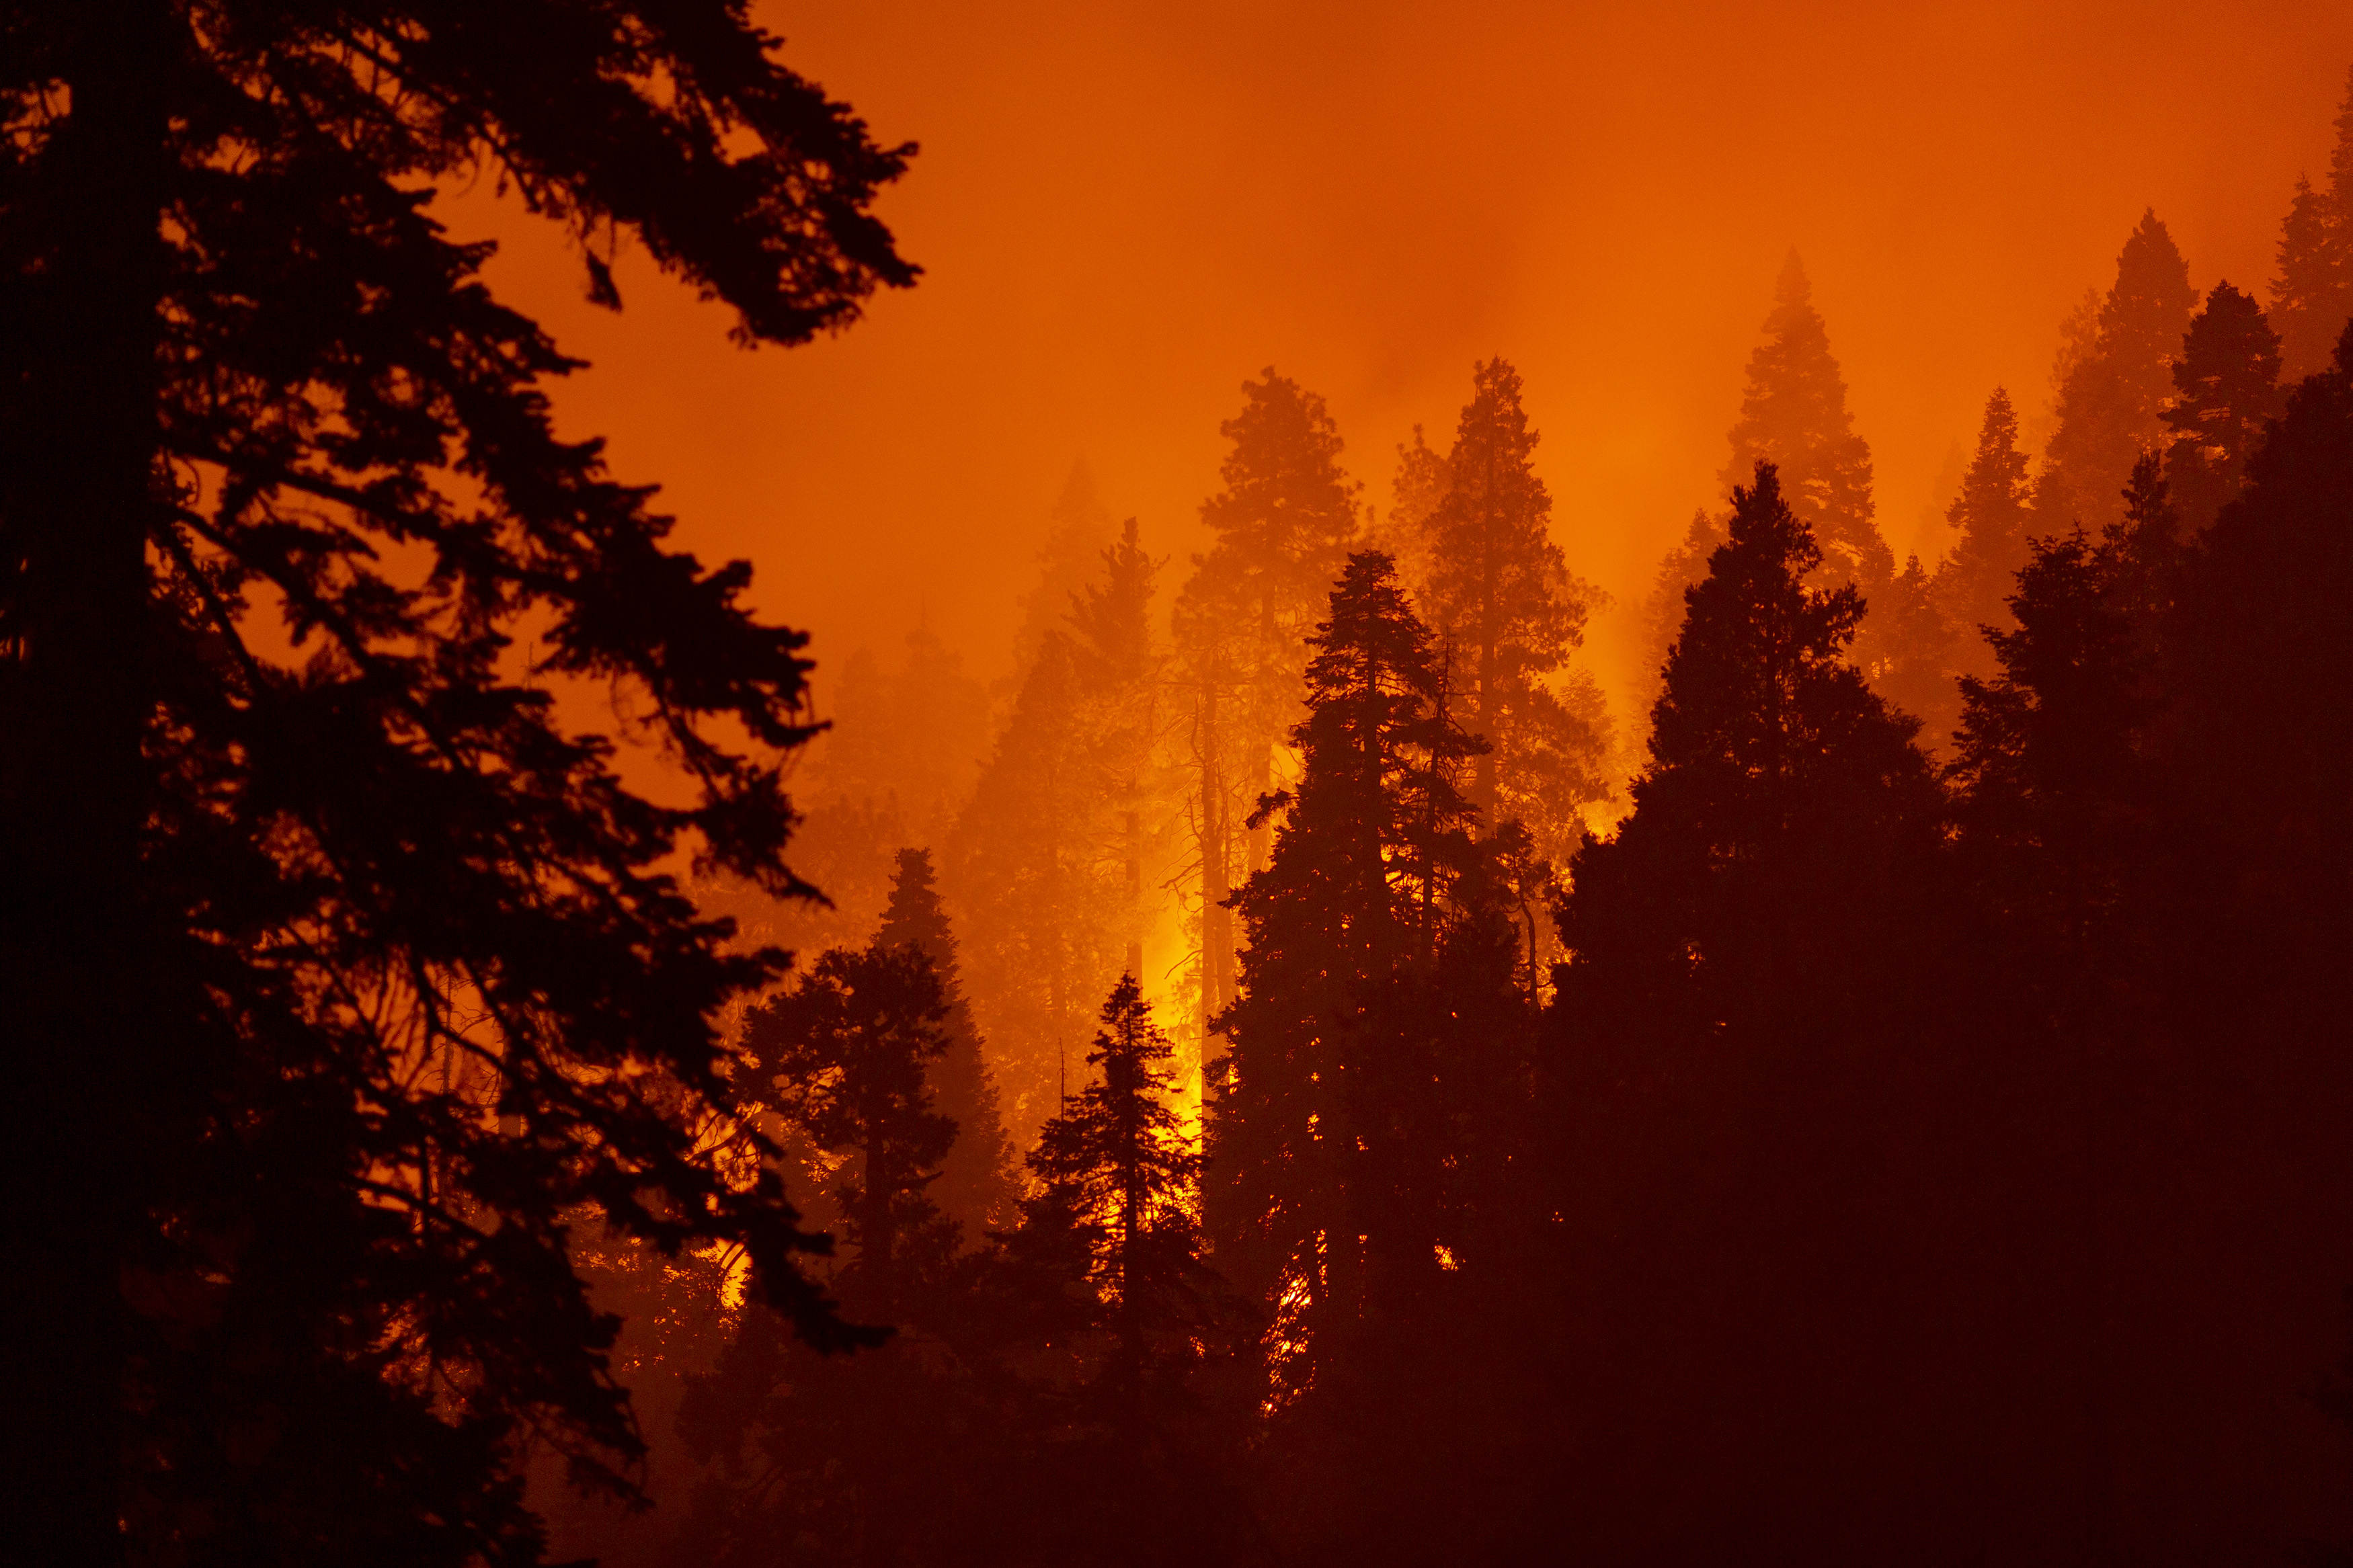 How and When Did the California Wildfires Start?